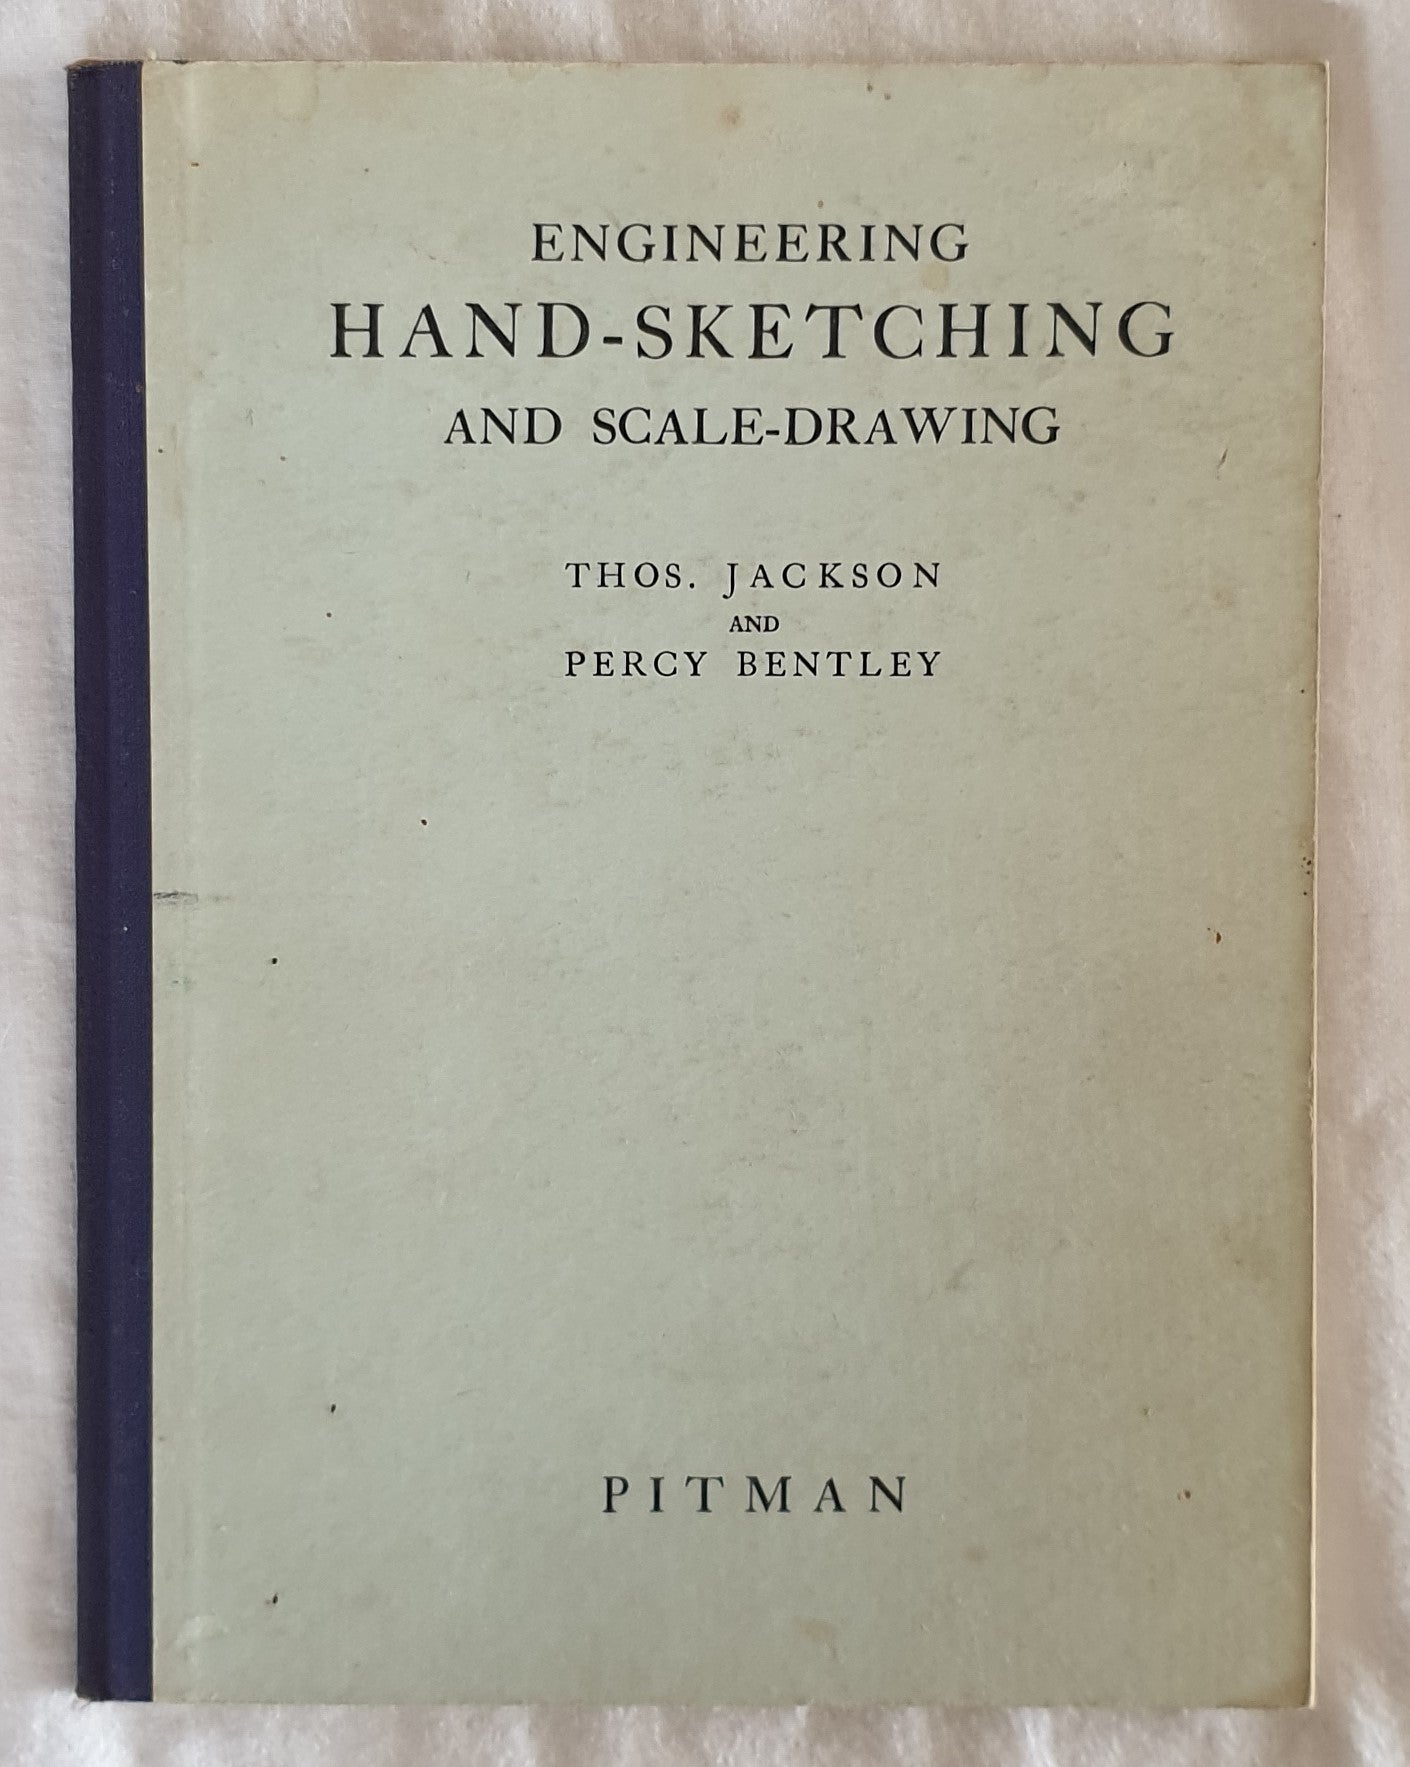 Engineering Hand-Sketching and Scale-Drawing  by Thos. Jackson and Percy Bentley